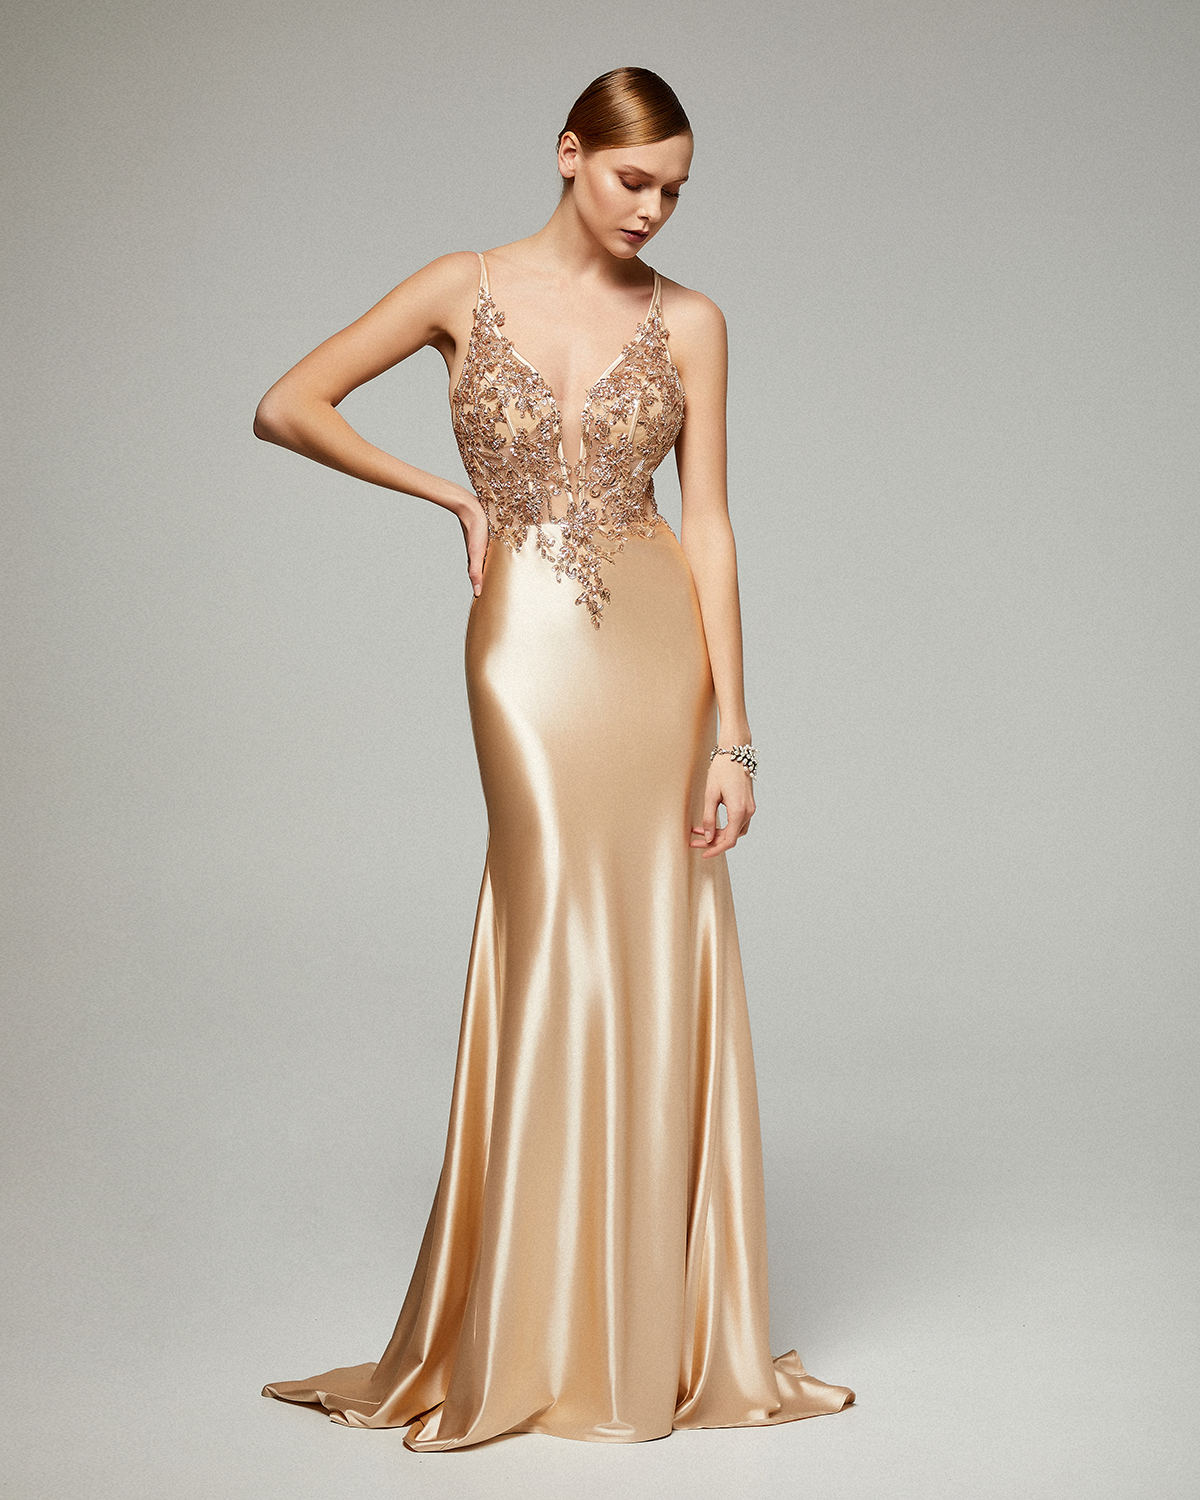 Long evening satin dress with beaded top and open back